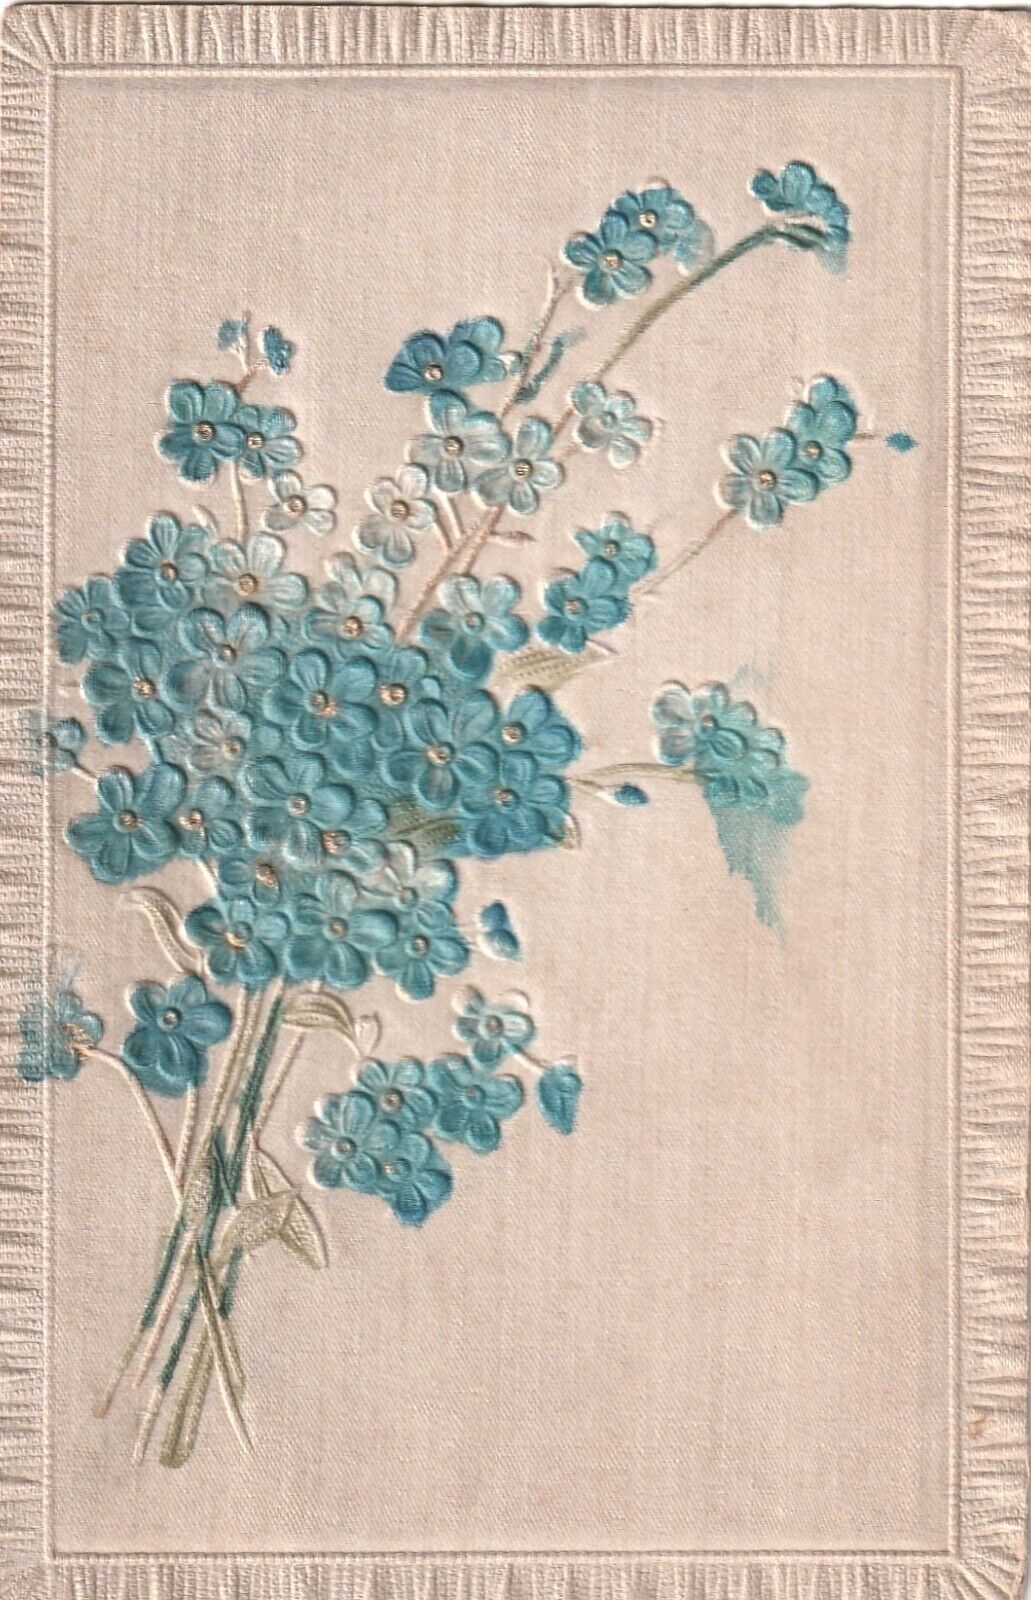 ANTIQUE Forget-Me-Not POSTCARD UnPosted 1930